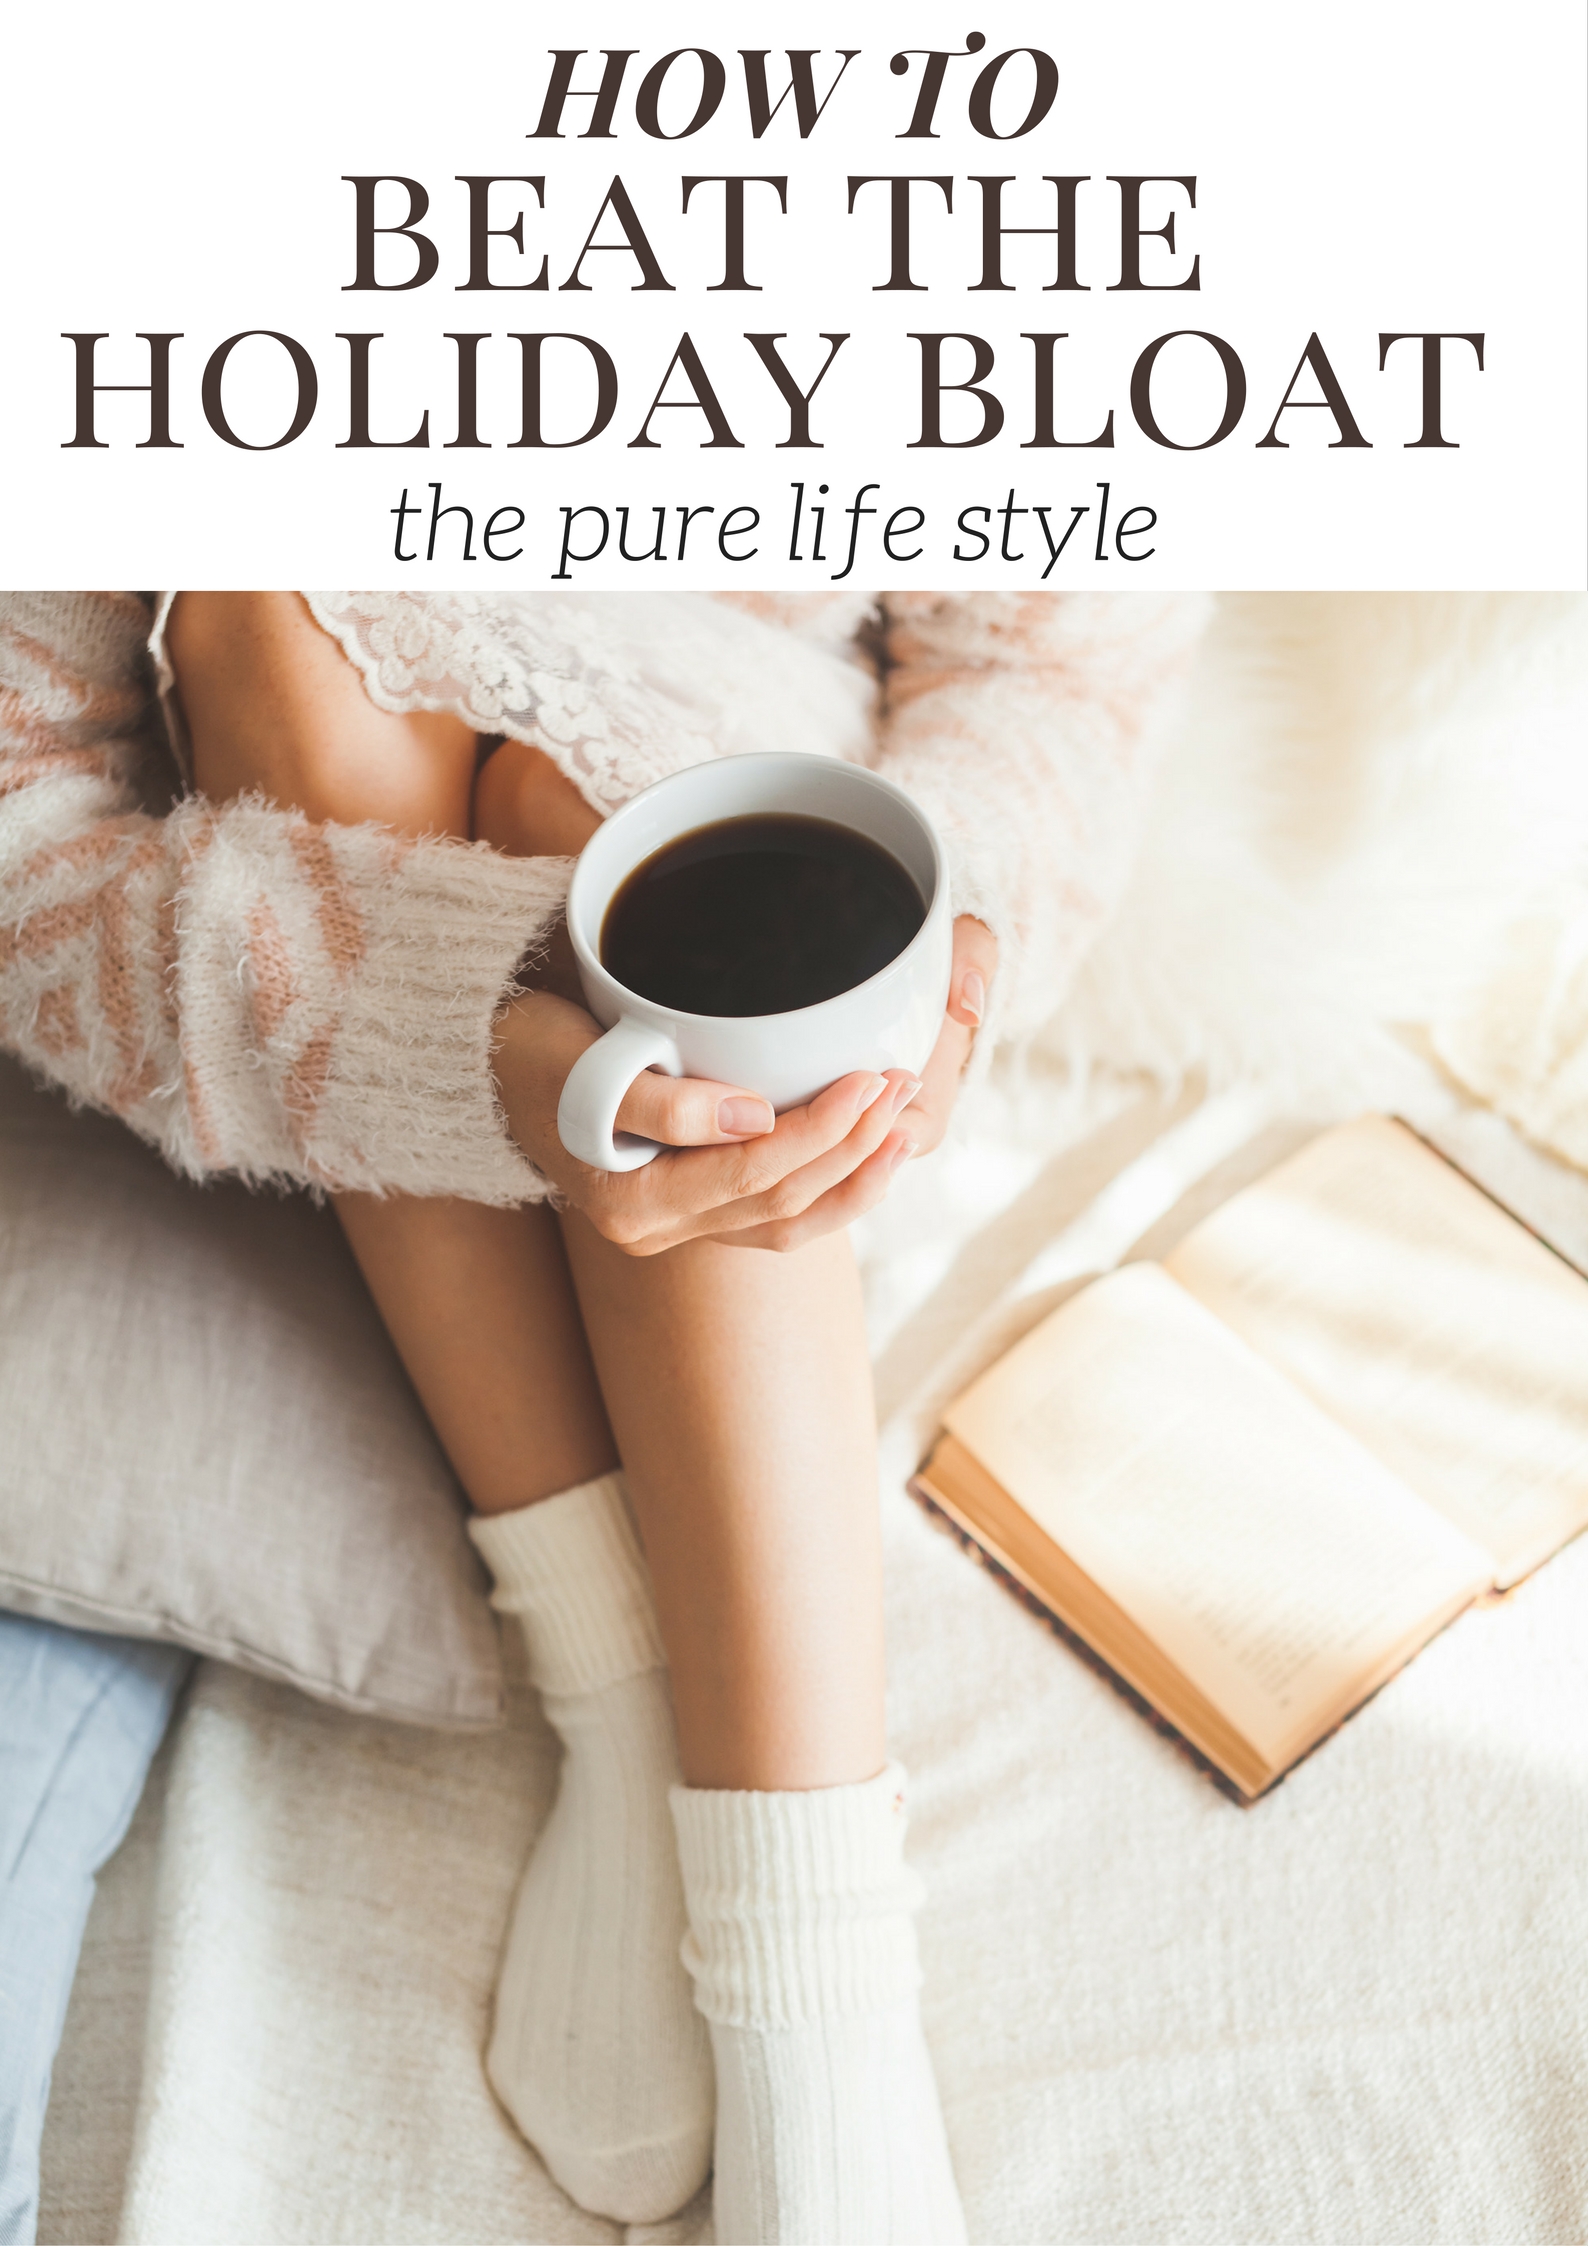 How to Beat the Holiday Bloat